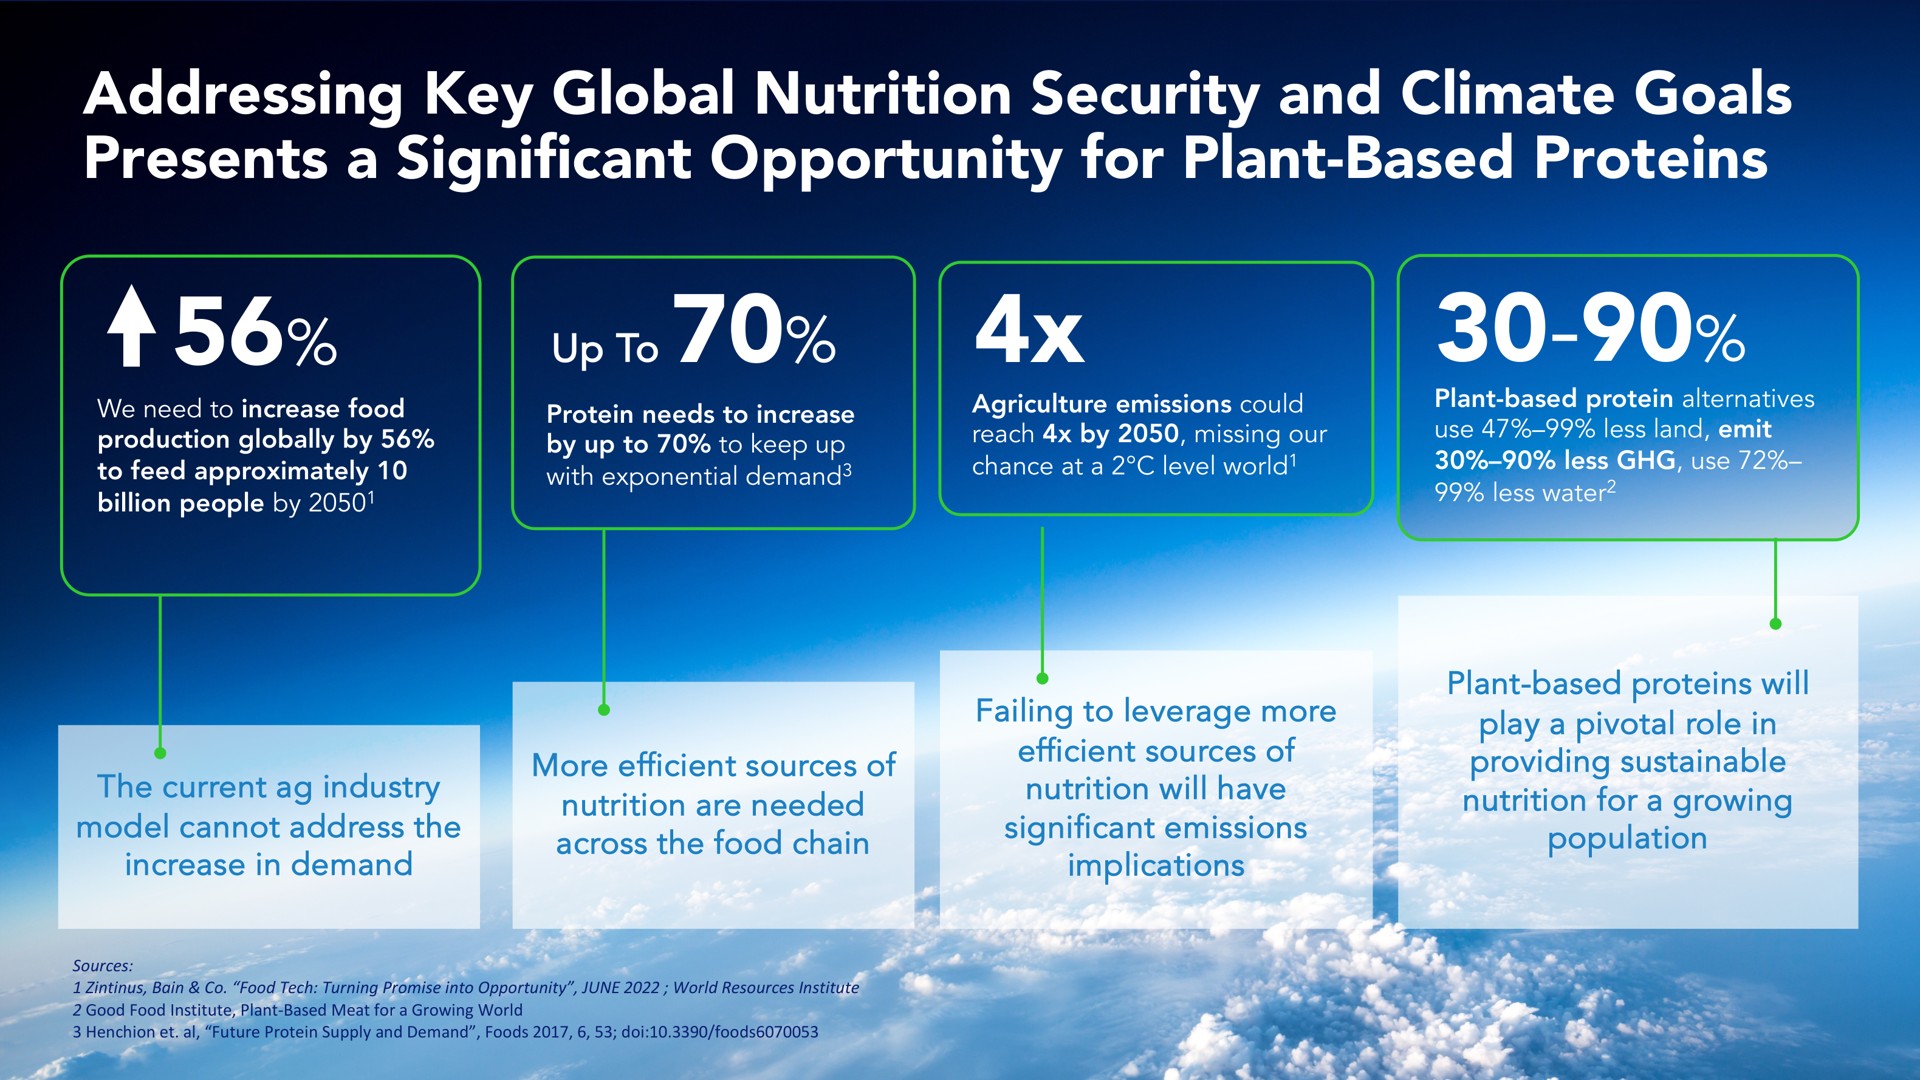 addressing key global nutrition security and climate goals presents a significant opportunity for plant based proteins we need to increase food production globally by to feed approximately billion people by up to protein needs to increase by up to to keep up with exponential demand agriculture emissions could reach by missing our chance at a level world plant based protein alternatives use less land emit less use less water the current industry model cannot address the increase in demand more efficient sources of nutrition are needed across the food chain failing to leverage more efficient sources of nutrition will have significant emissions implications plant based proteins will play a pivotal role in providing sustainable nutrition for a growing population i world me act bar pacer | Benson Hill